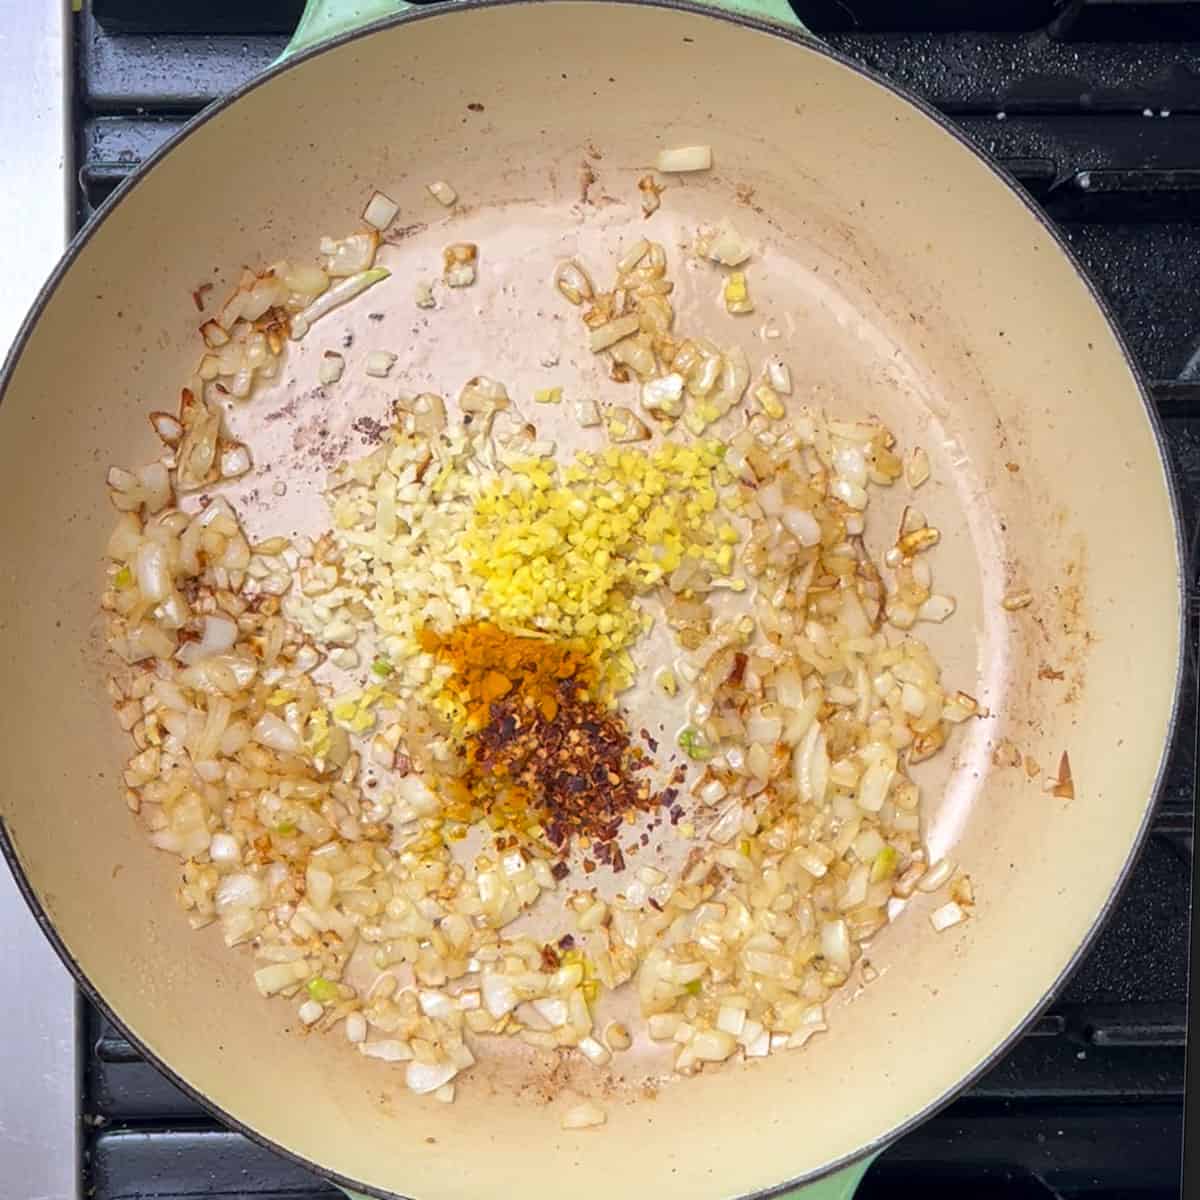 sautéd chopped onions in a shallow dutch oven with raw chopped ginger and garlic on top and some turmeric and red chili flakes.